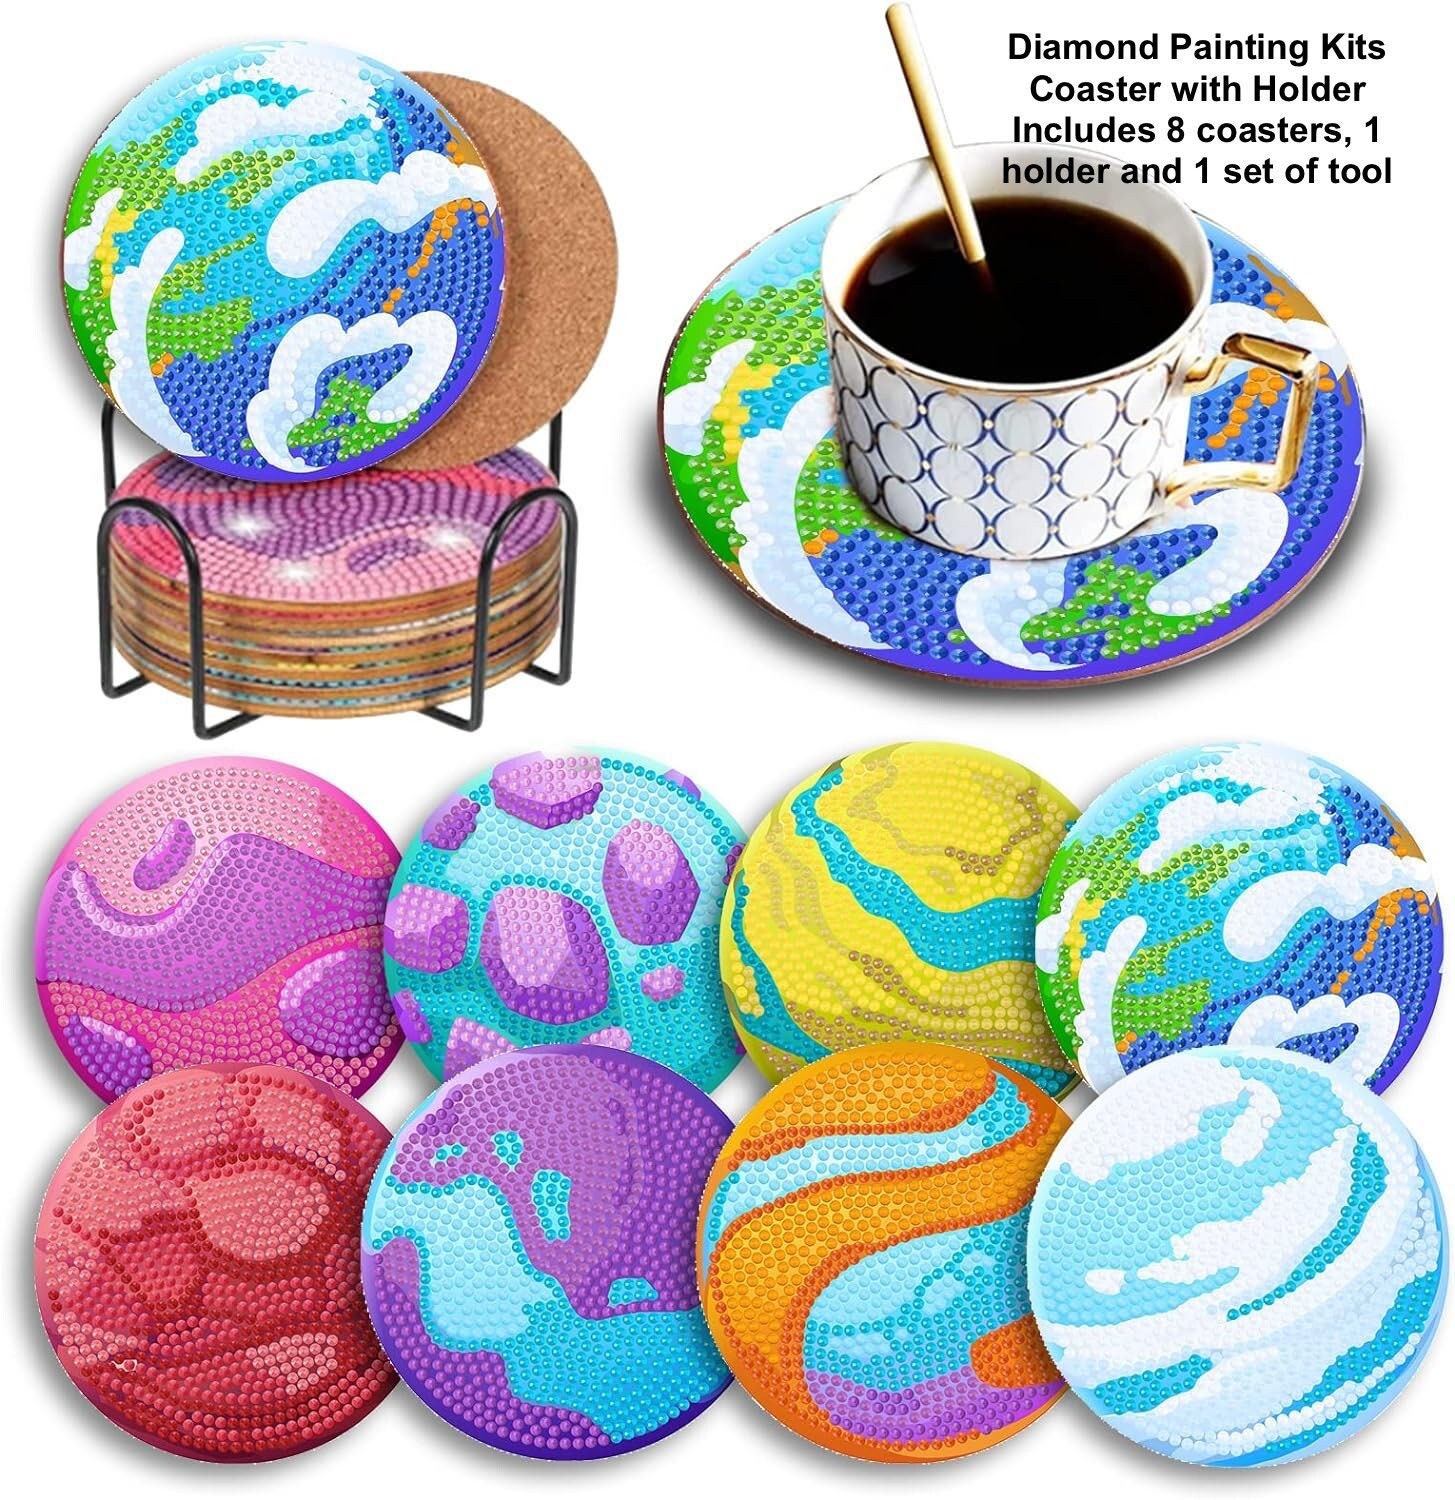 8 Pcs Diamond Painting Coasters With Holder DIY Blue Marble Ocean Diamond  Art Coasters For Drinks Diamond Painting Kits For Beginners Diamond Art  Kits Craft Supplies For Adults Coasters Gift